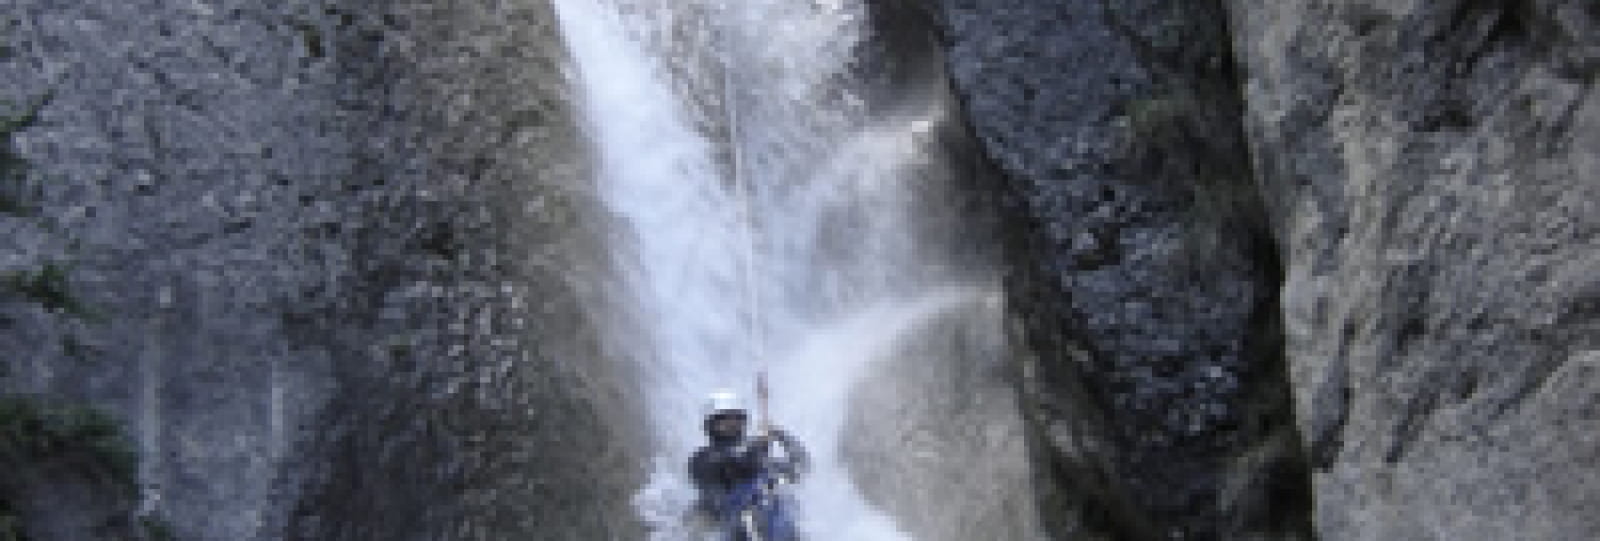 Canyoning dans le Diois